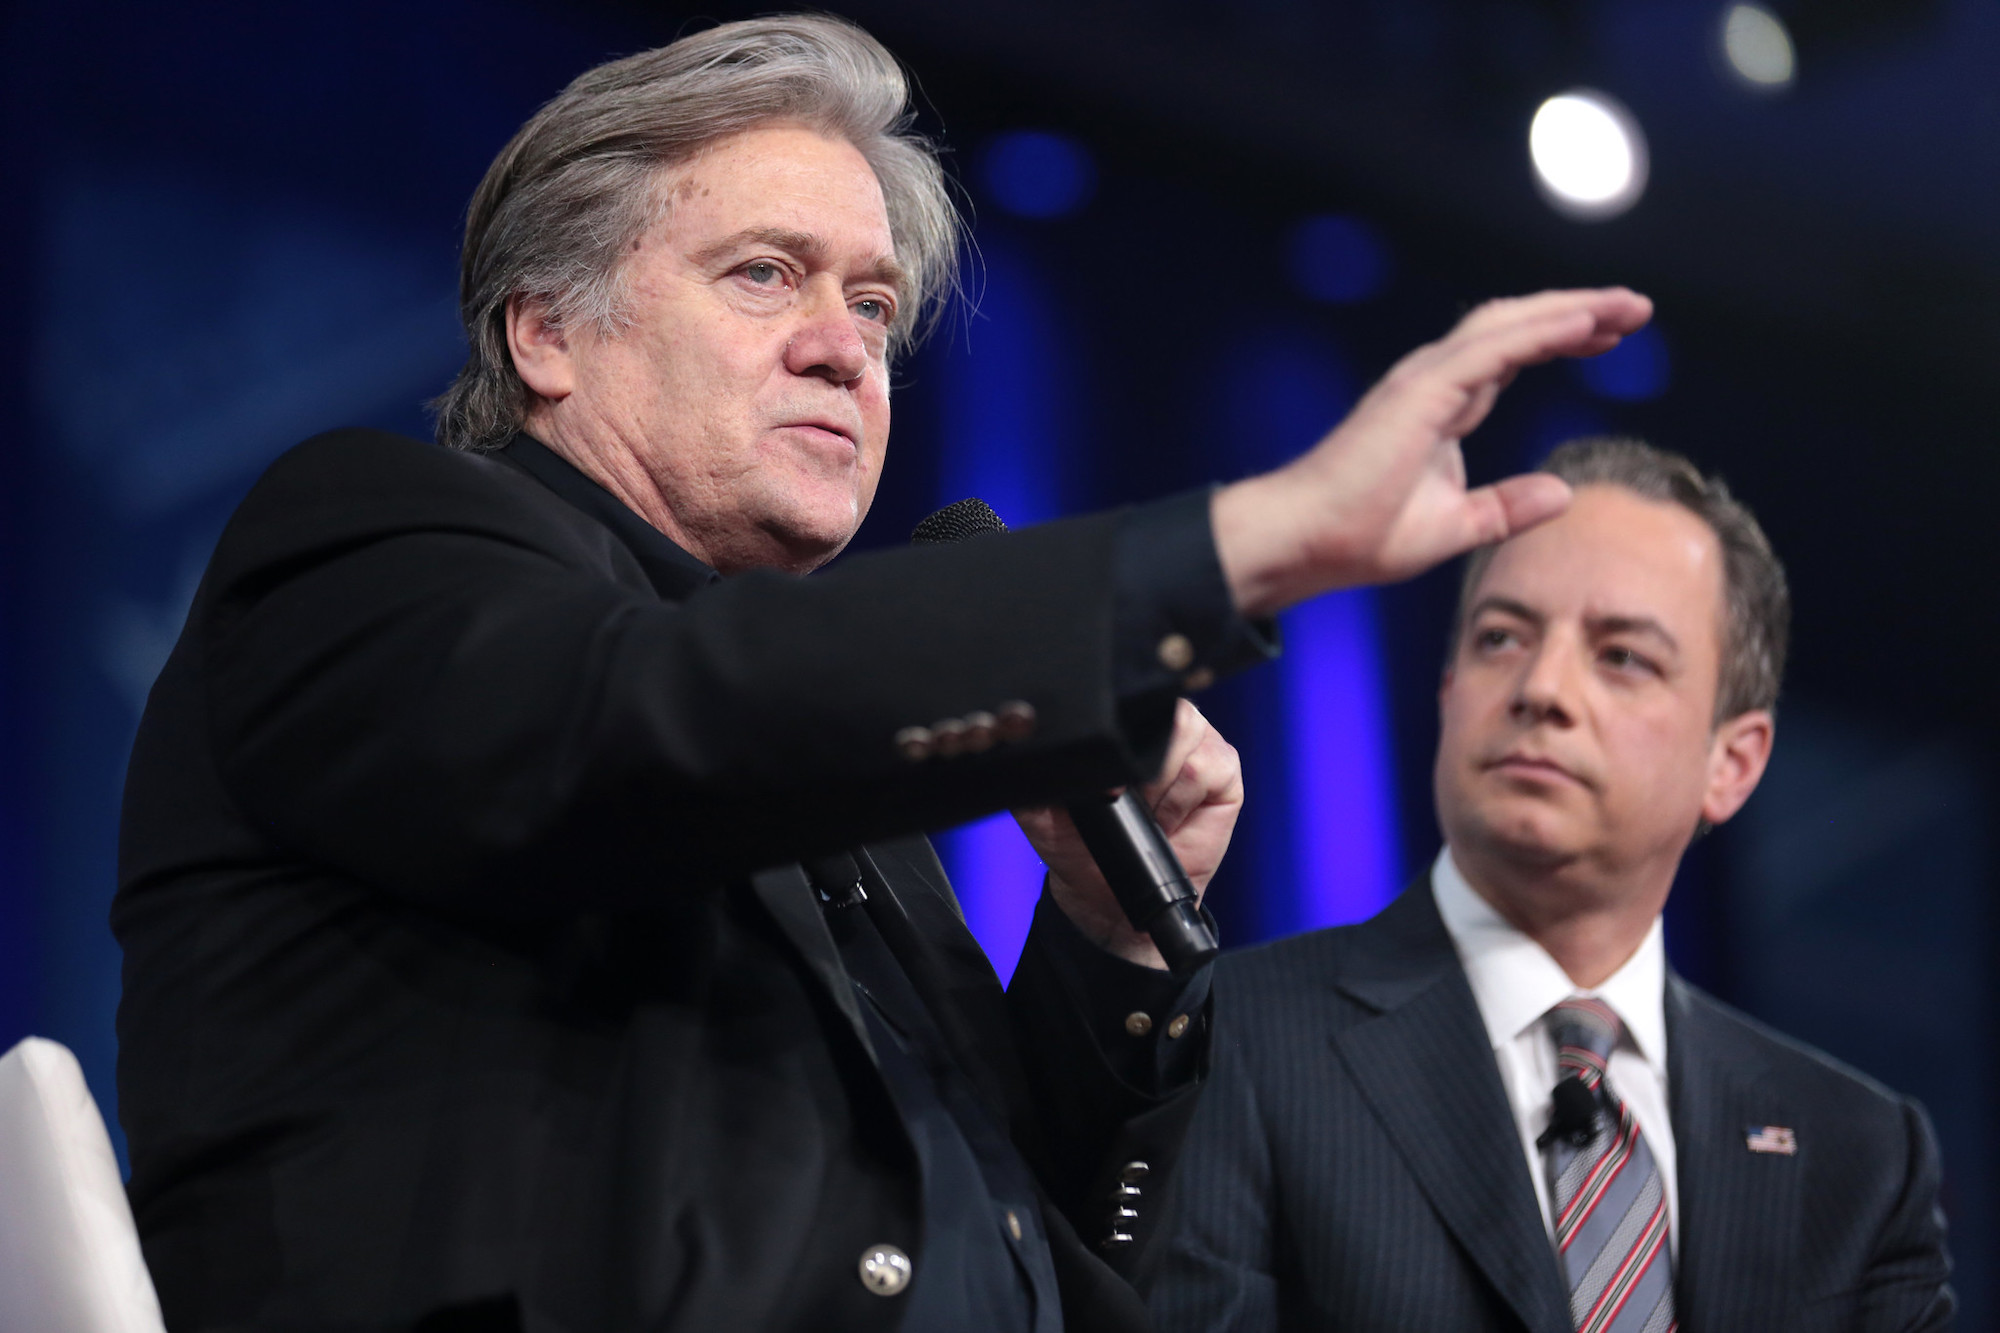 A photo of Steve Bannon and Reince Priebus